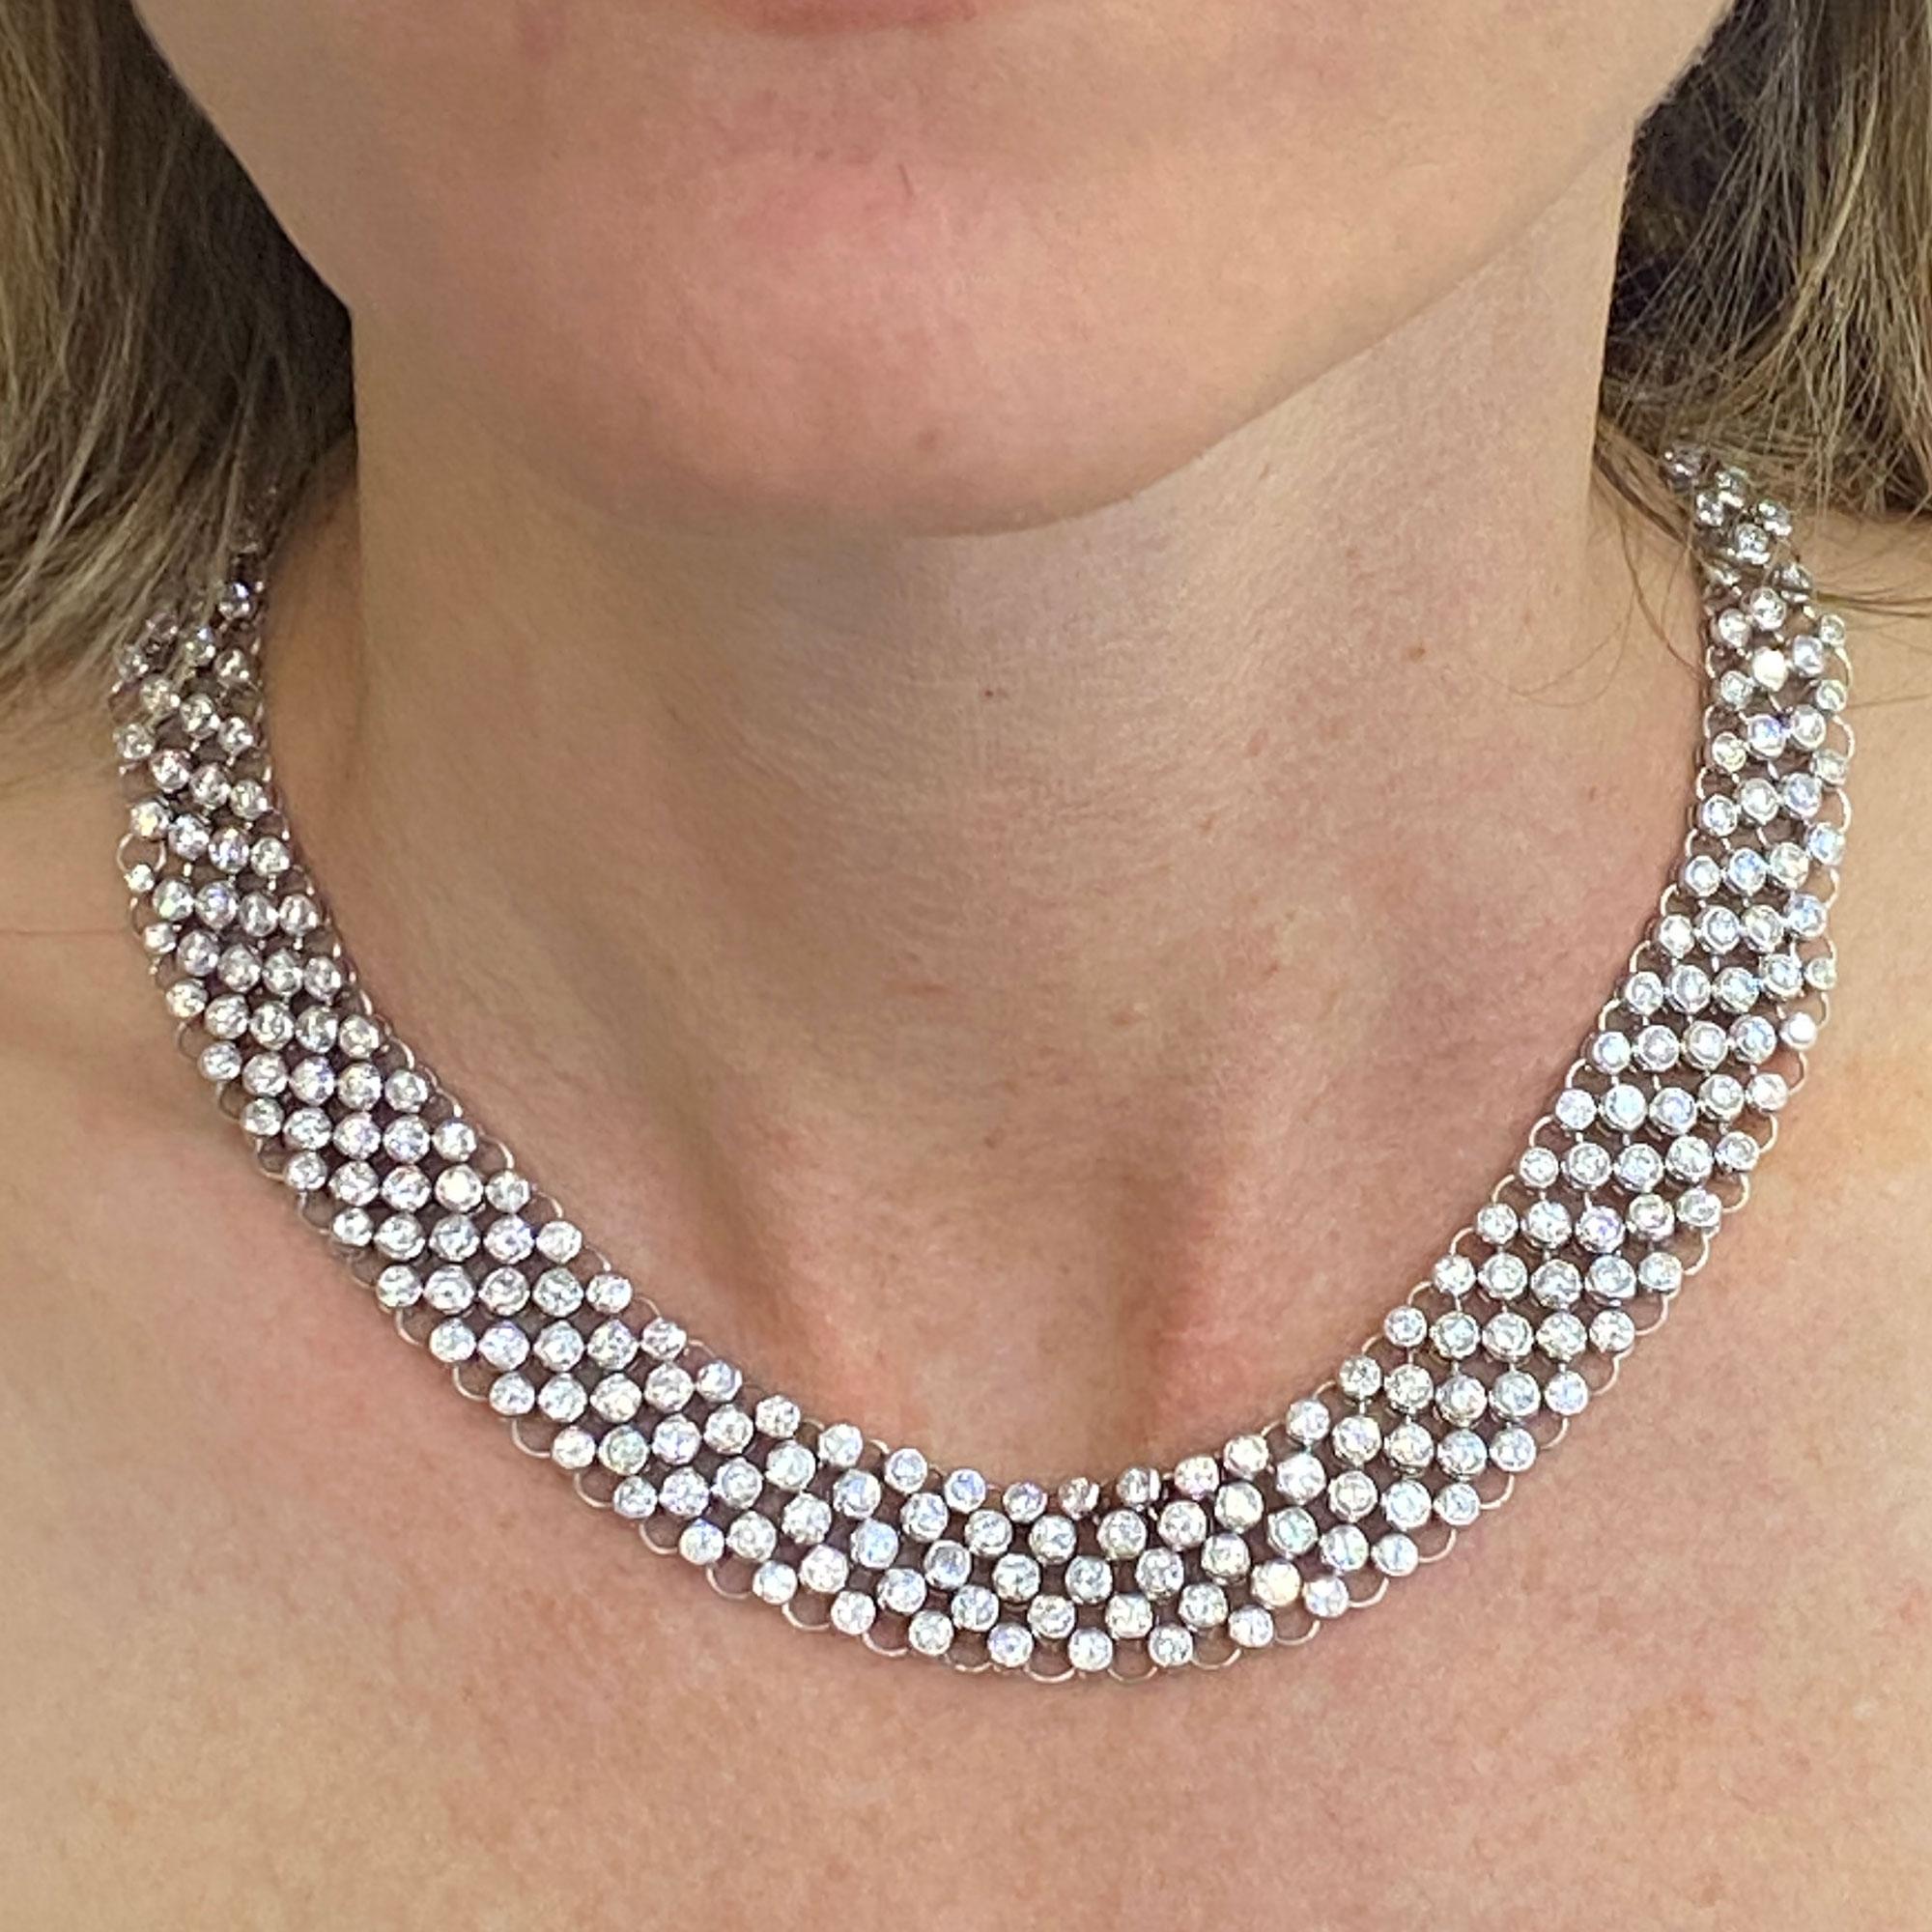 Stunning diamond collar necklace fashioned in 18 karat white gold. The flexible hand crafted necklace features 23 carats of high quality white round brilliant cut diamonds graded G-H color and VS2-SI1 clarity. The necklace tapers and measures 15mm